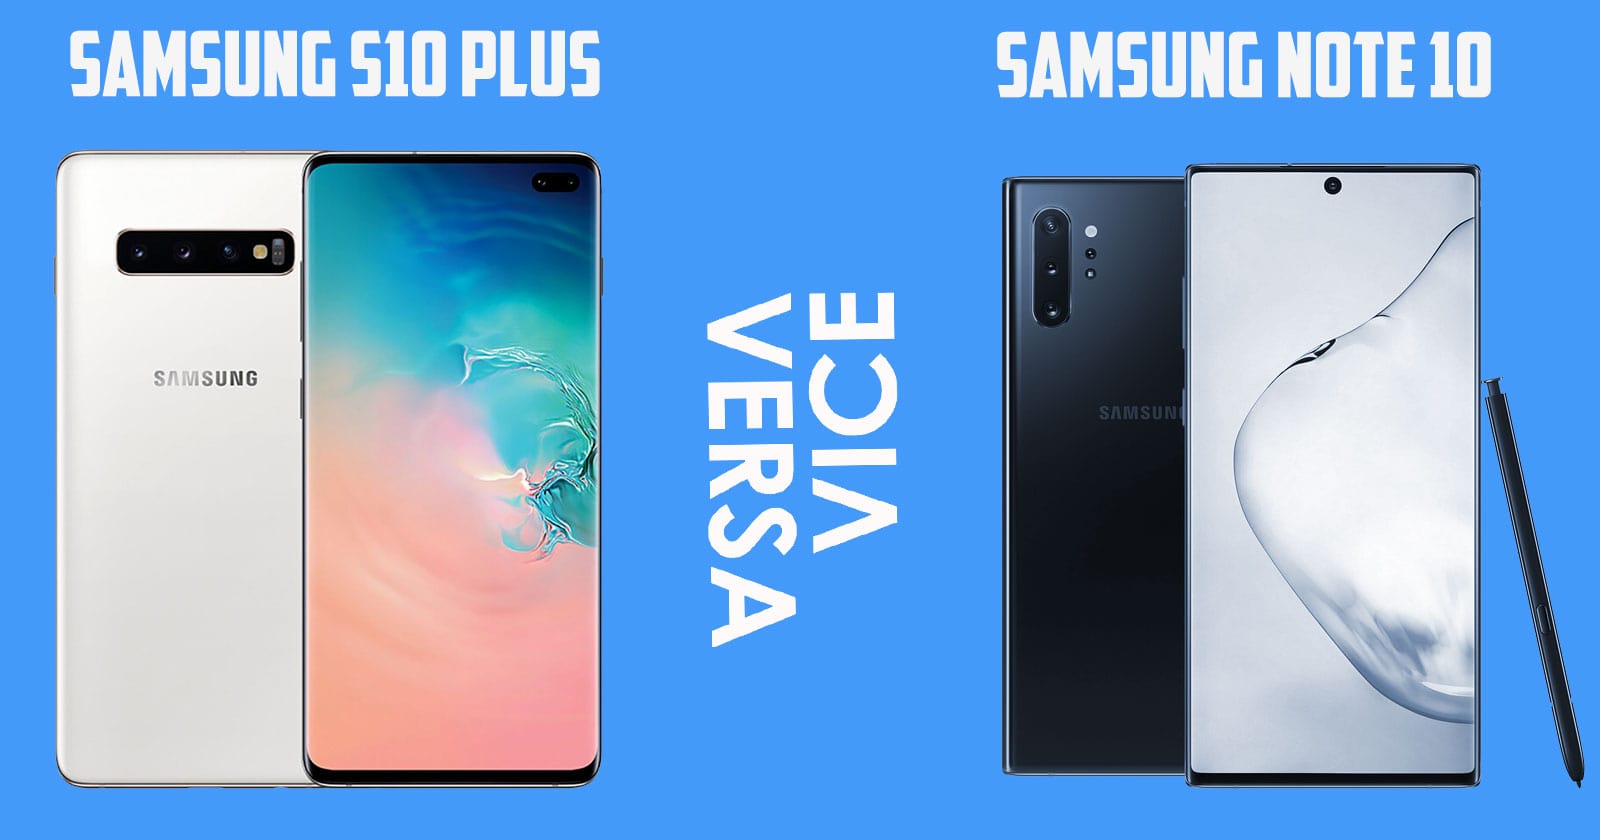 Is the note 10 better than the s10 plus?